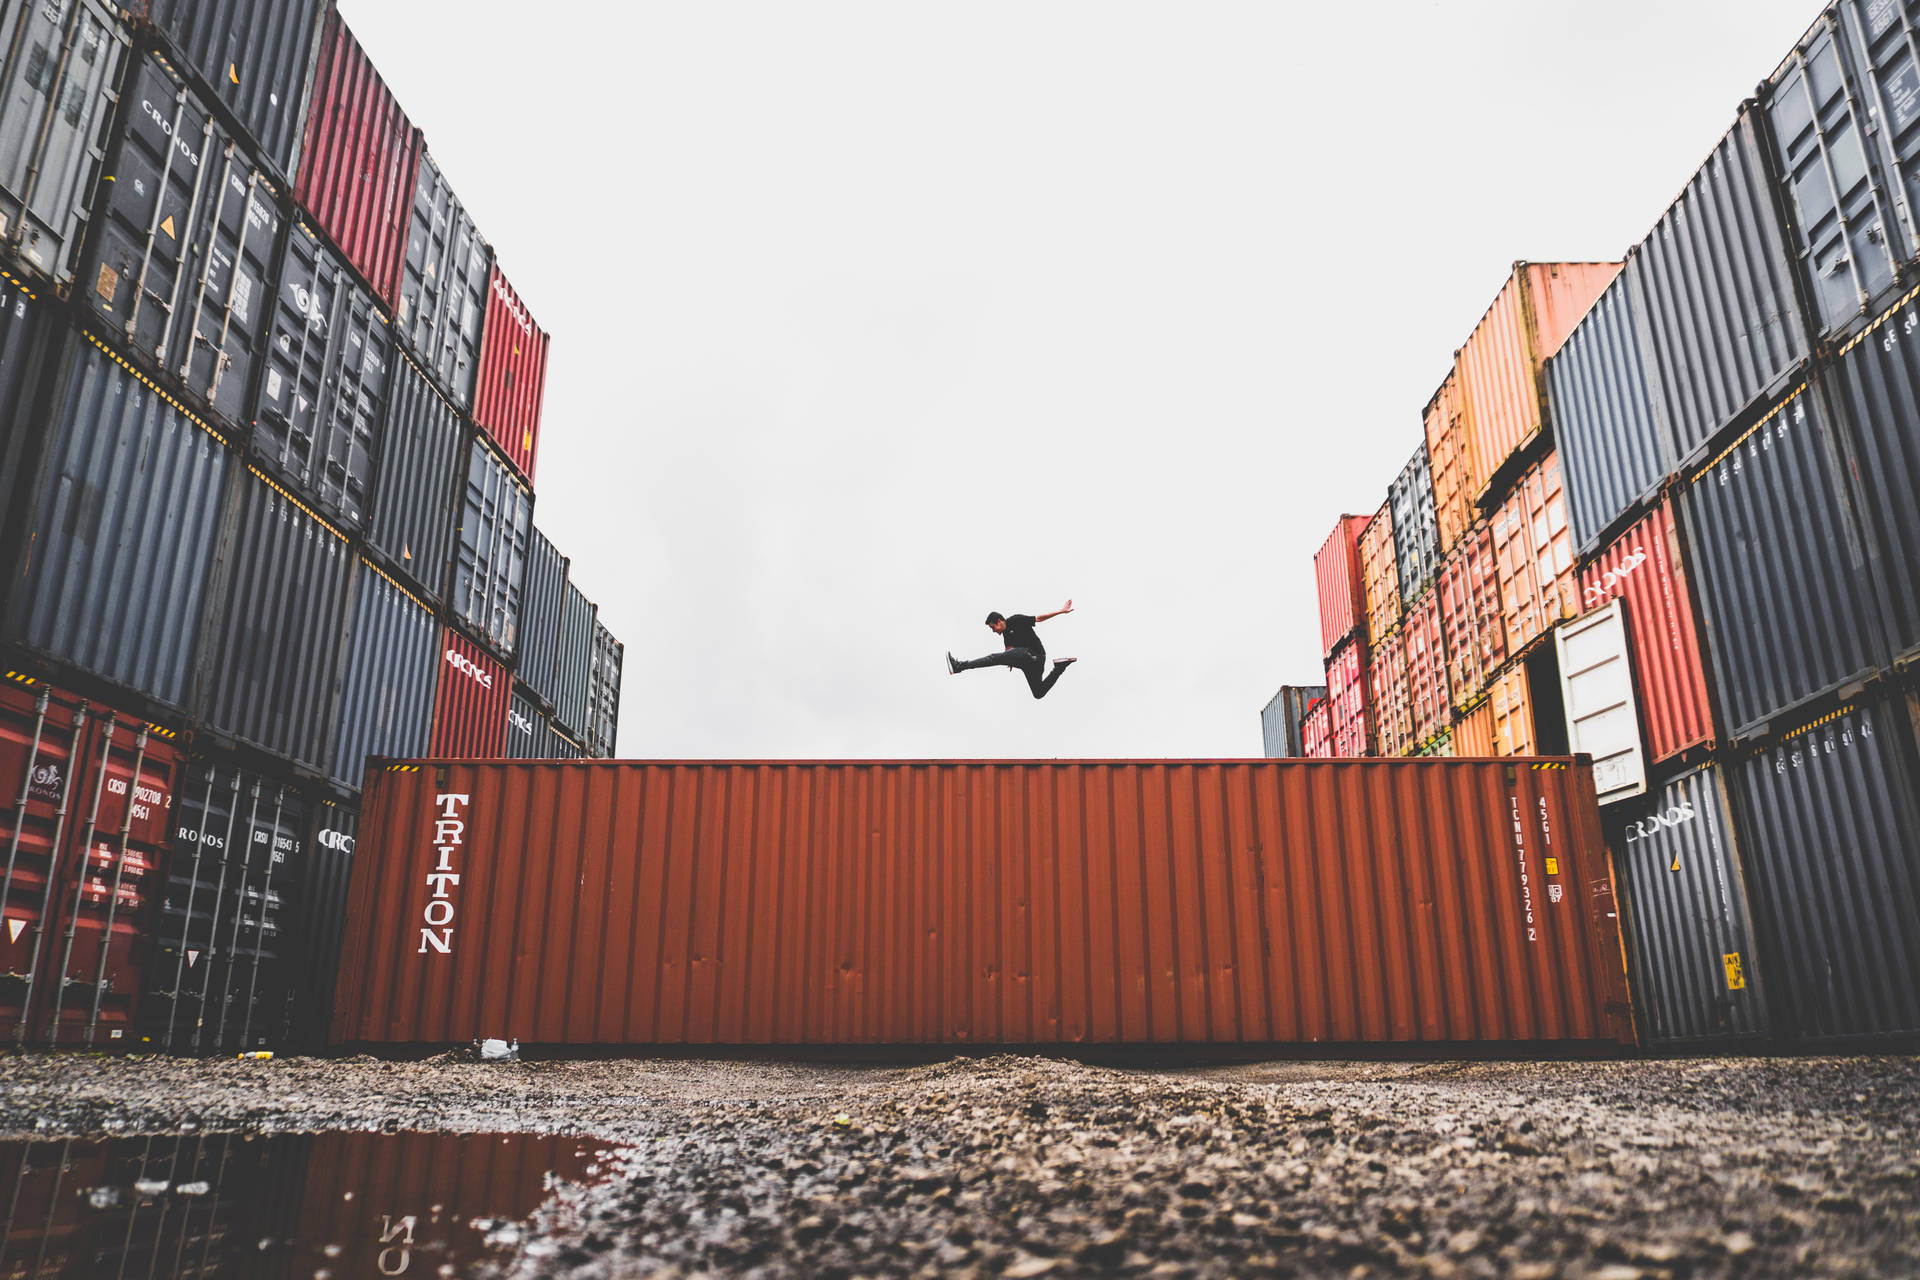 Caption: Fearless Leap Amidst Shipping Containers